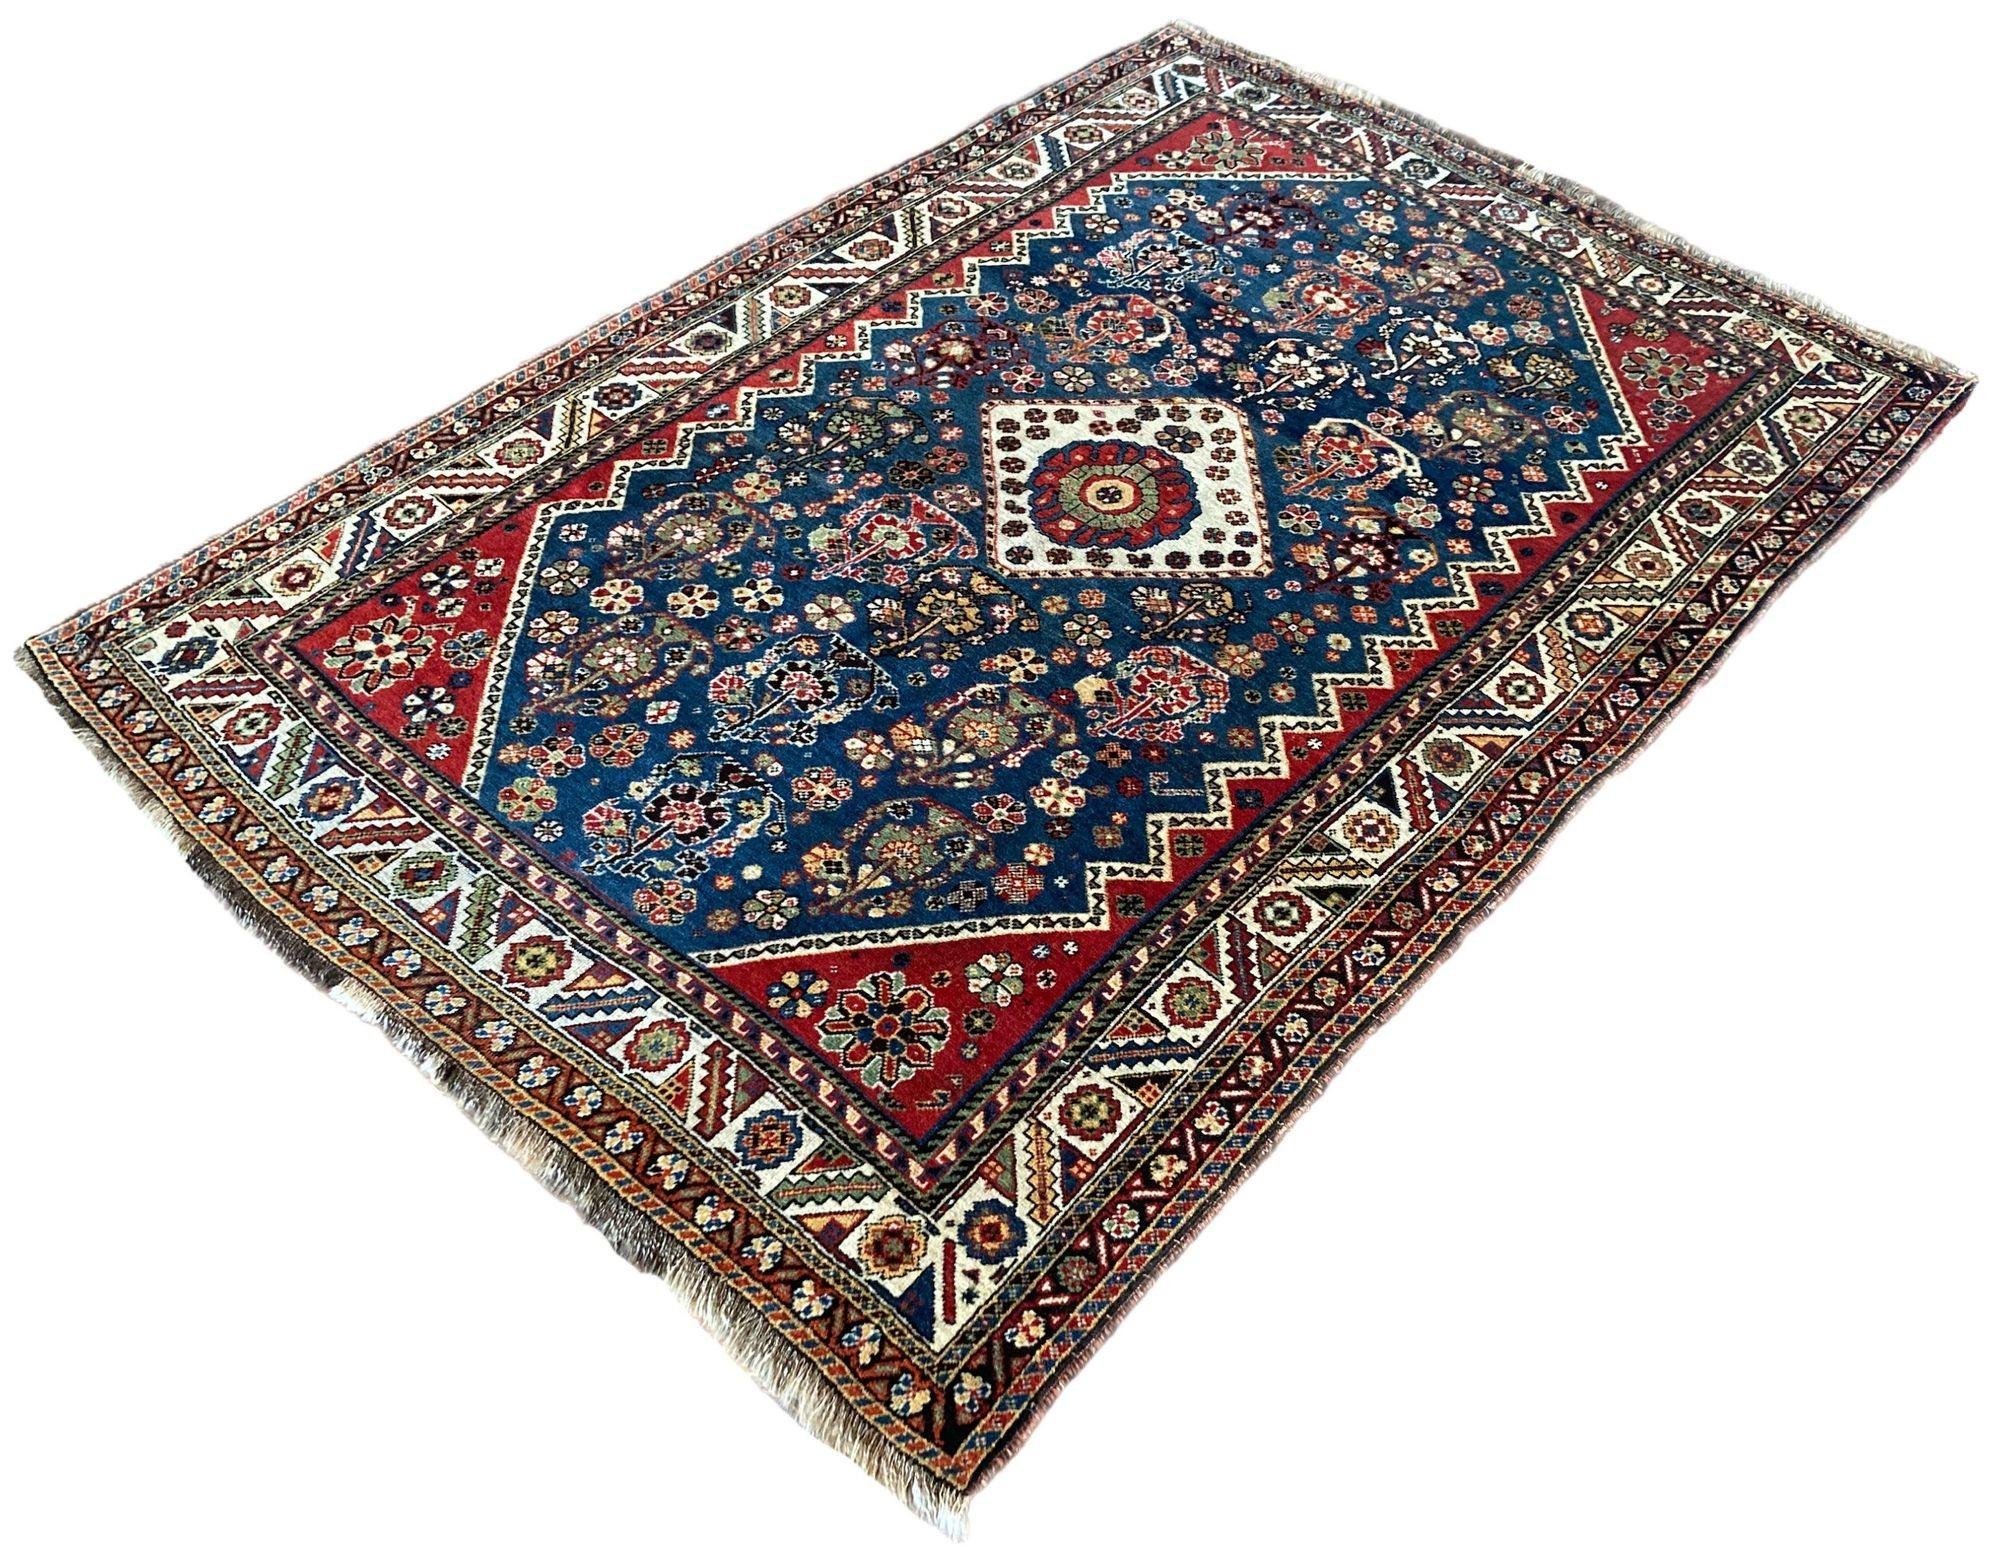 Antique Qashqai Rug 1.86m x 1.27m In Good Condition For Sale In St. Albans, GB